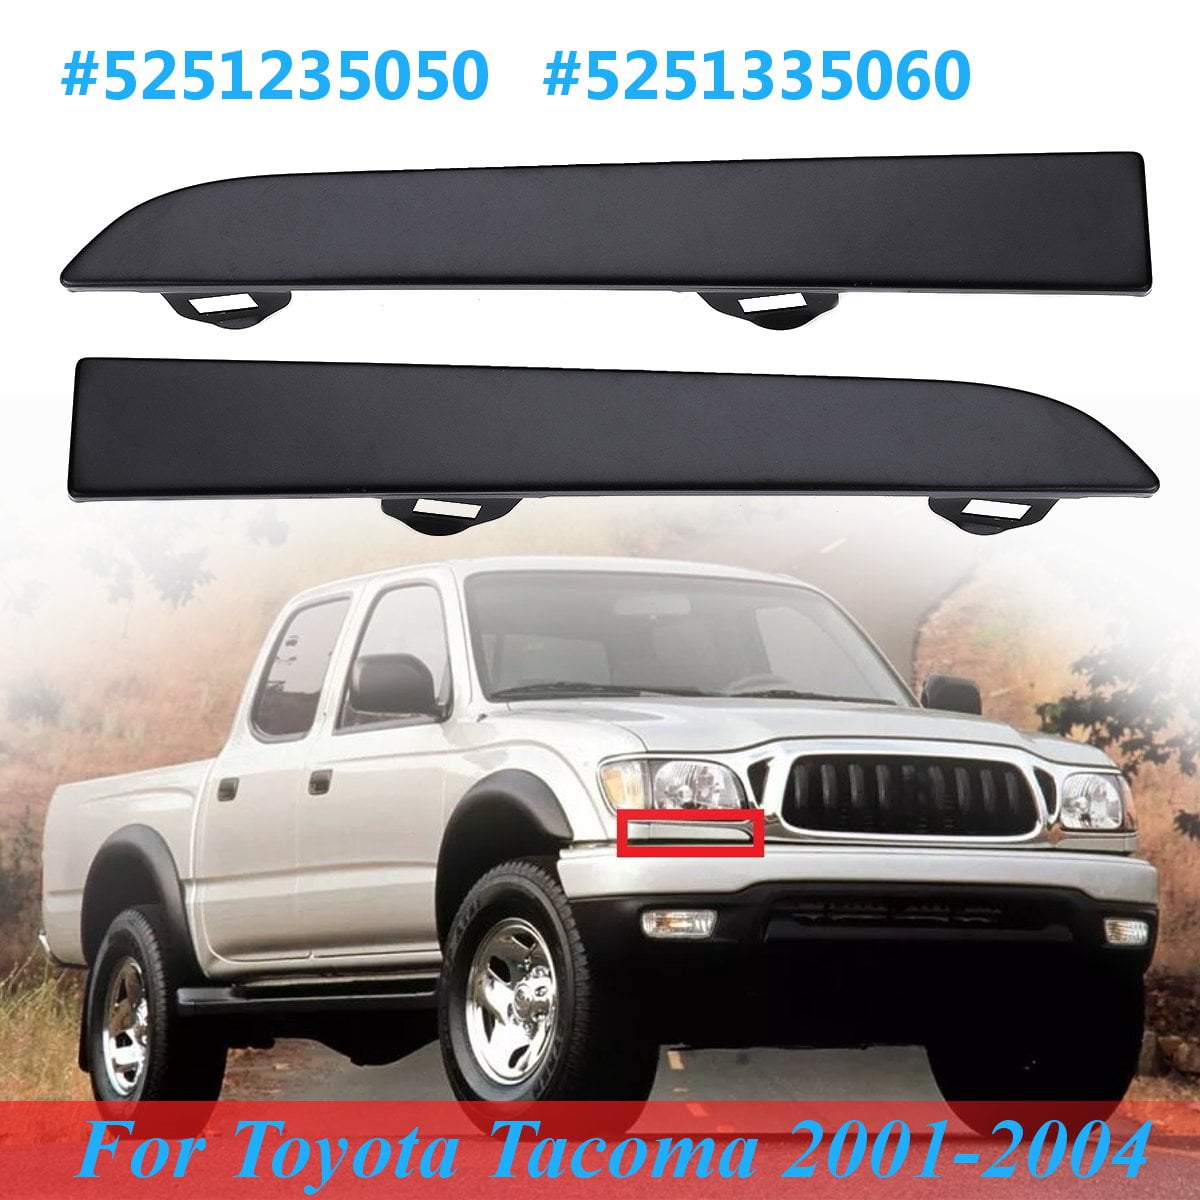 One Right/Left Front Grille Bumper Headlight Trim Panel For Toyota Tacoma 2001-2004 #5251235050 2001 Toyota Tacoma Front Bumper And Grill